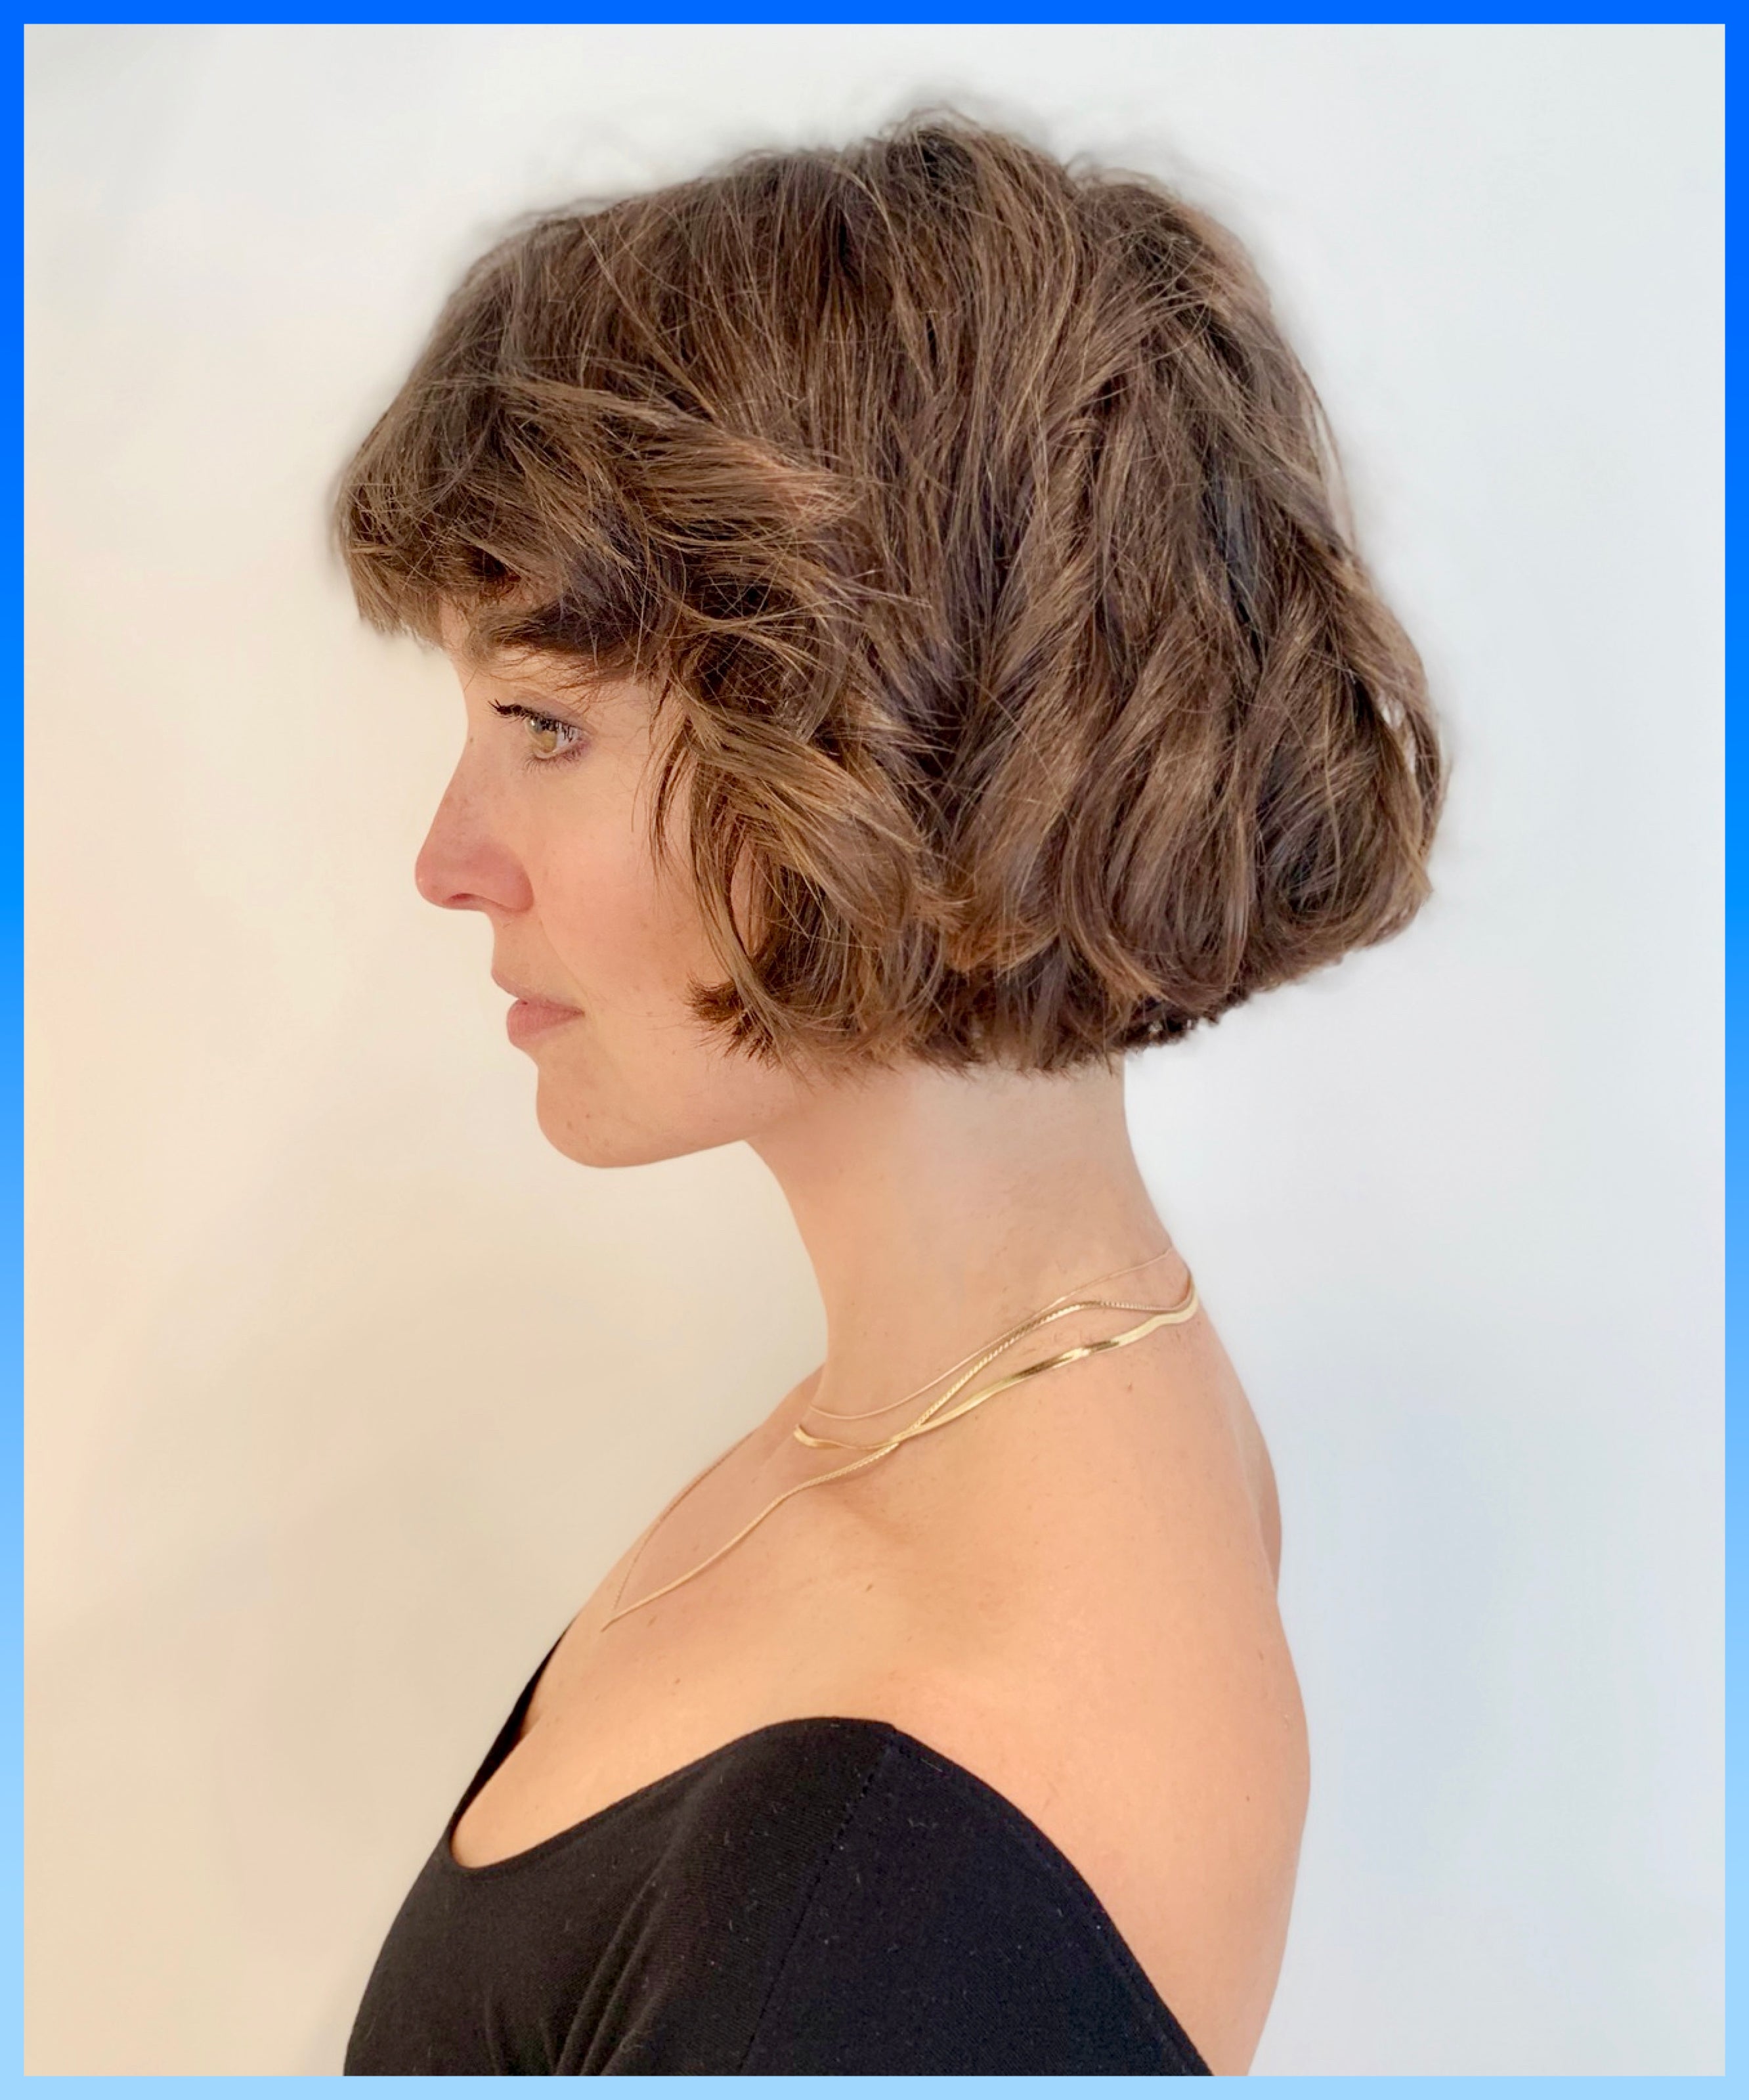 Cool Effortless French-Girl Haircut Trend For Fall 2021